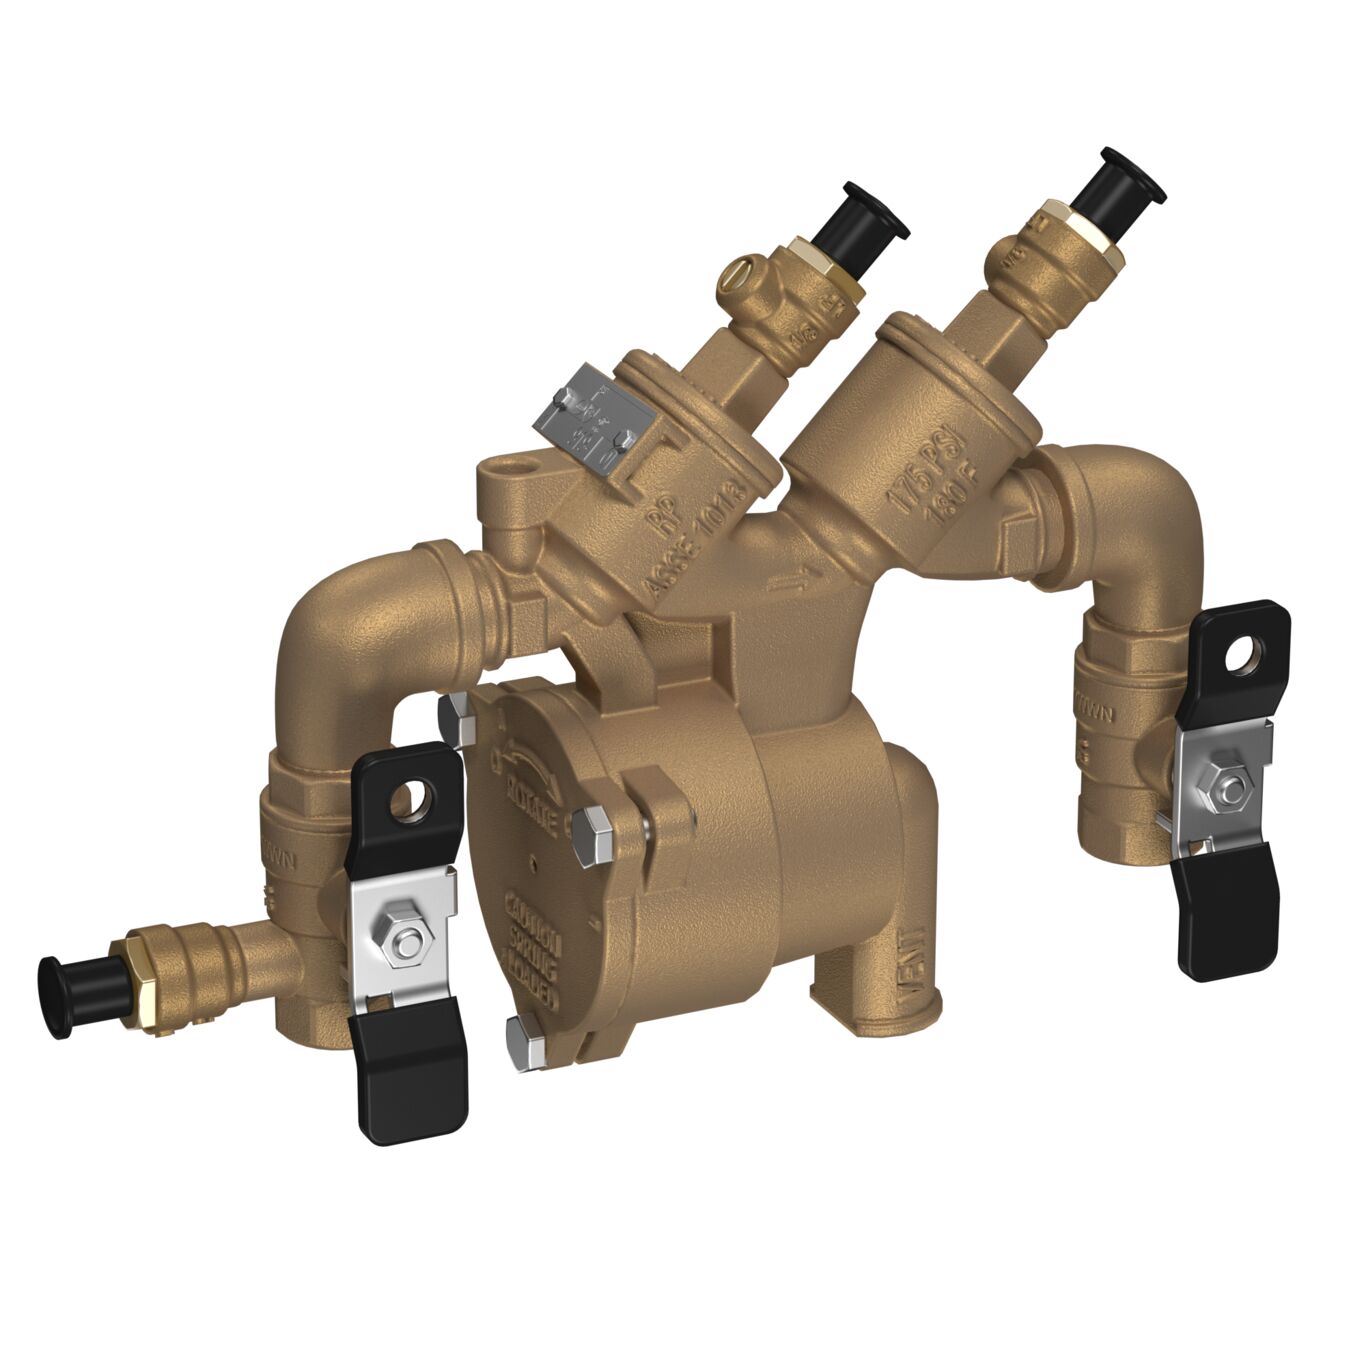 Product image - 919 Reduced Pressure Zone Backflow preventer Assembly, Quarter Turn Shutoff, Elbow